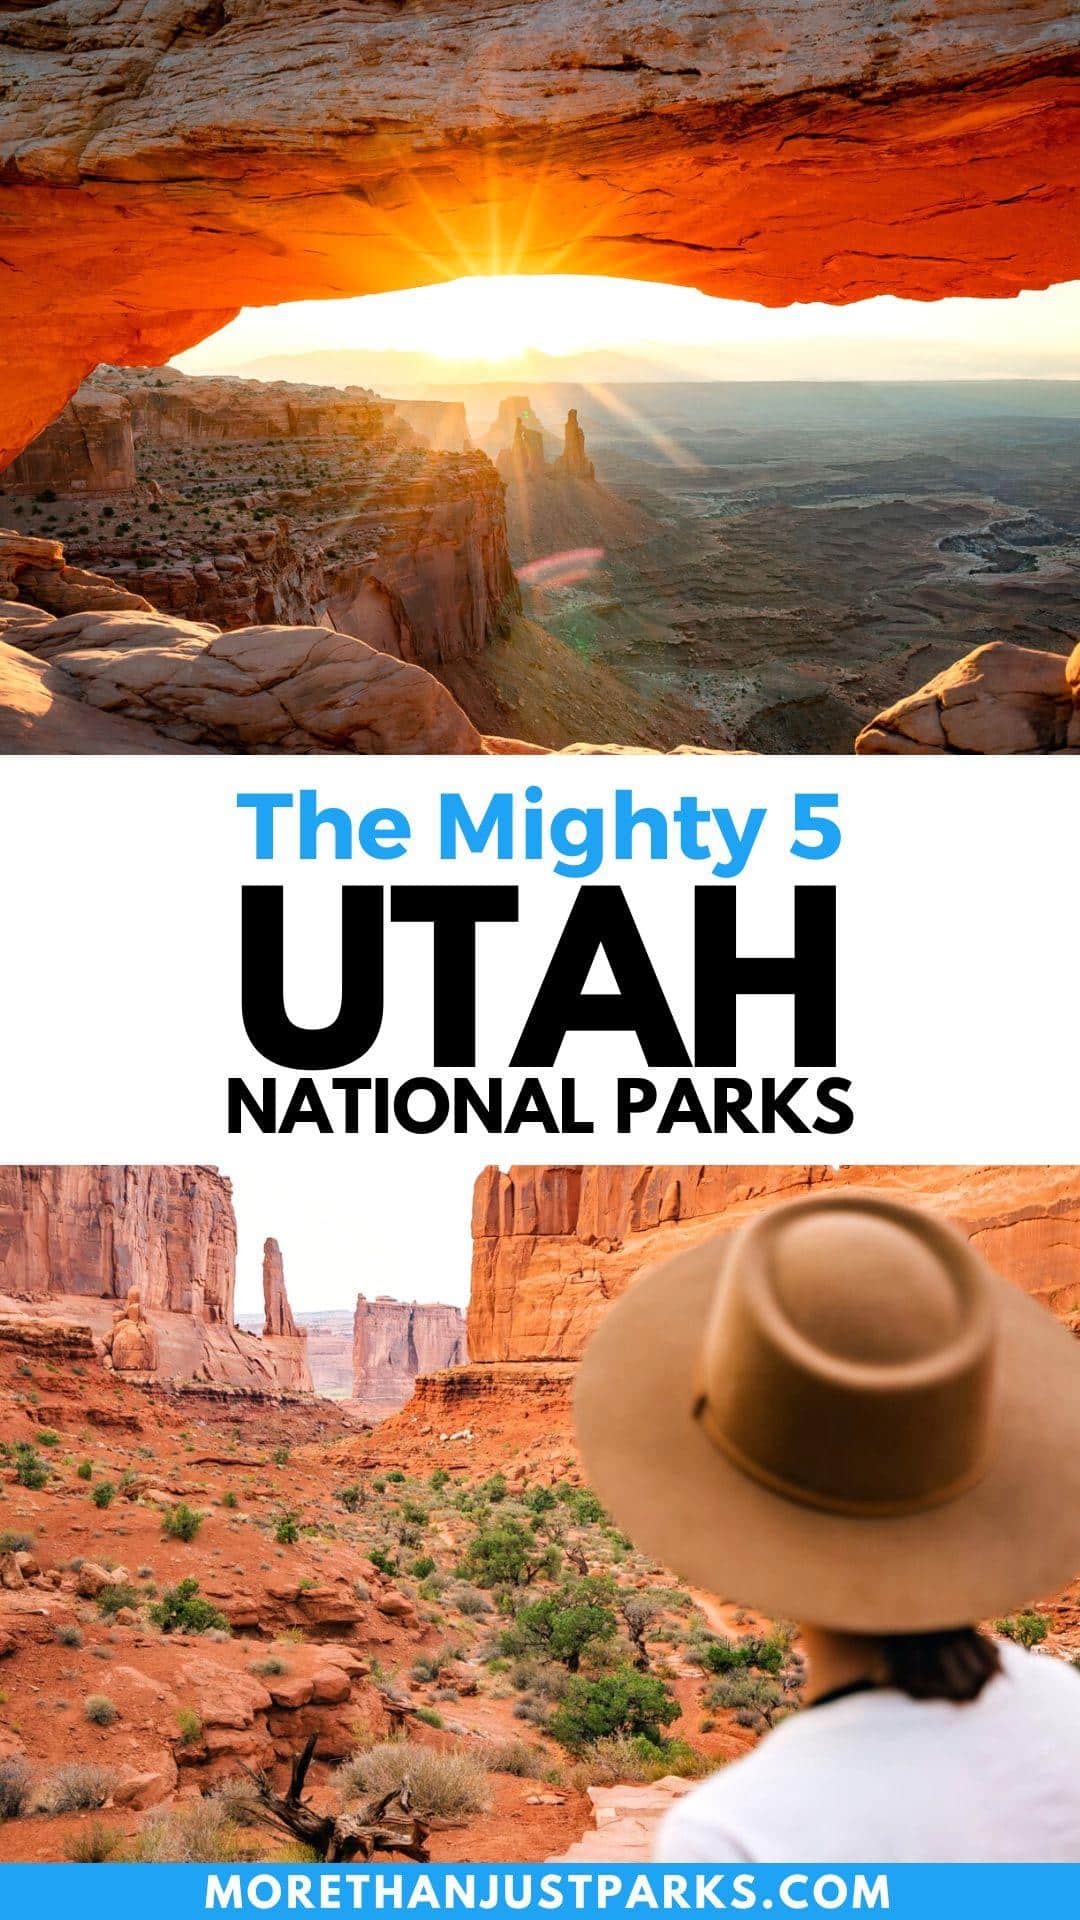 utah national parks, mighty five national parks, mighty 5 utah